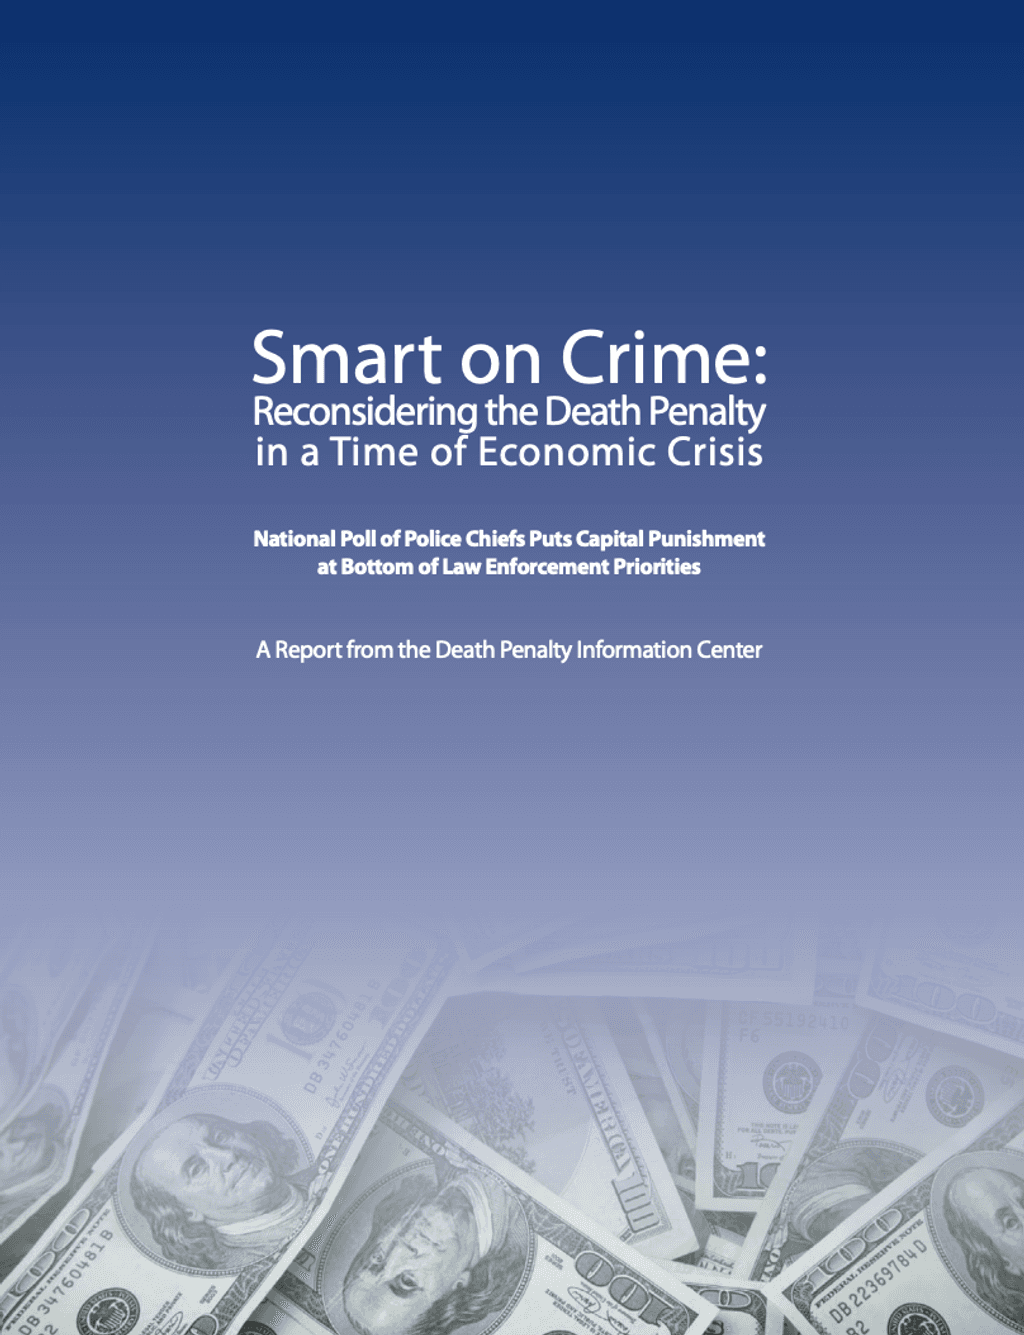 Smart on Crime: Reconsidering the Death Penalty in Time of Economic Crisis